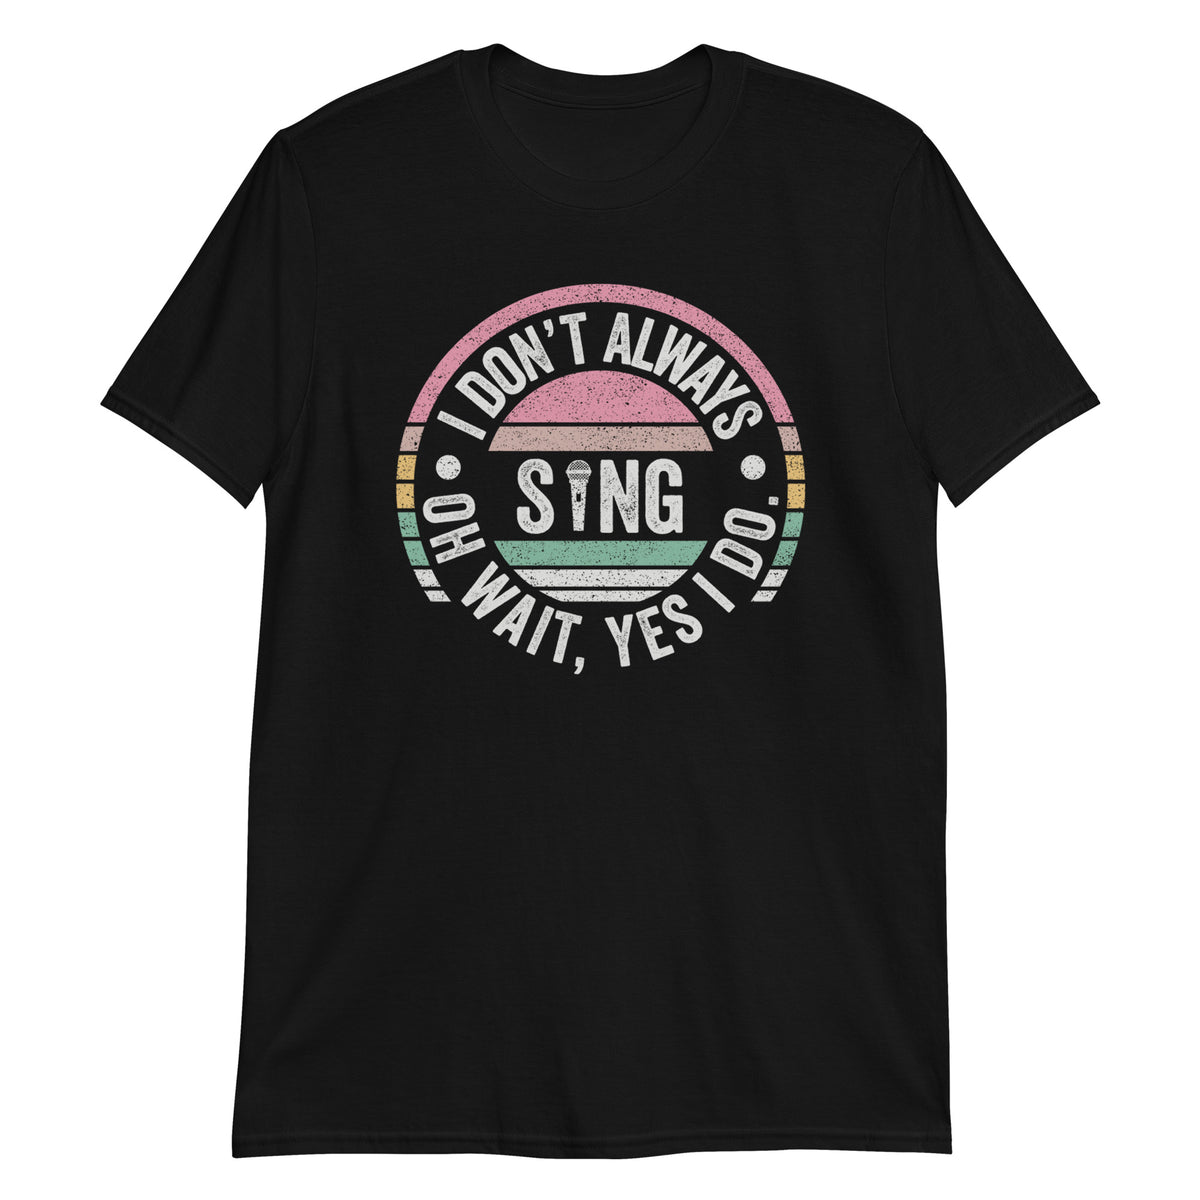 I Don't Always Sing Oh Wait Yes I Do, Actor Actress Musical Theater & Singer Gift T-Shirt